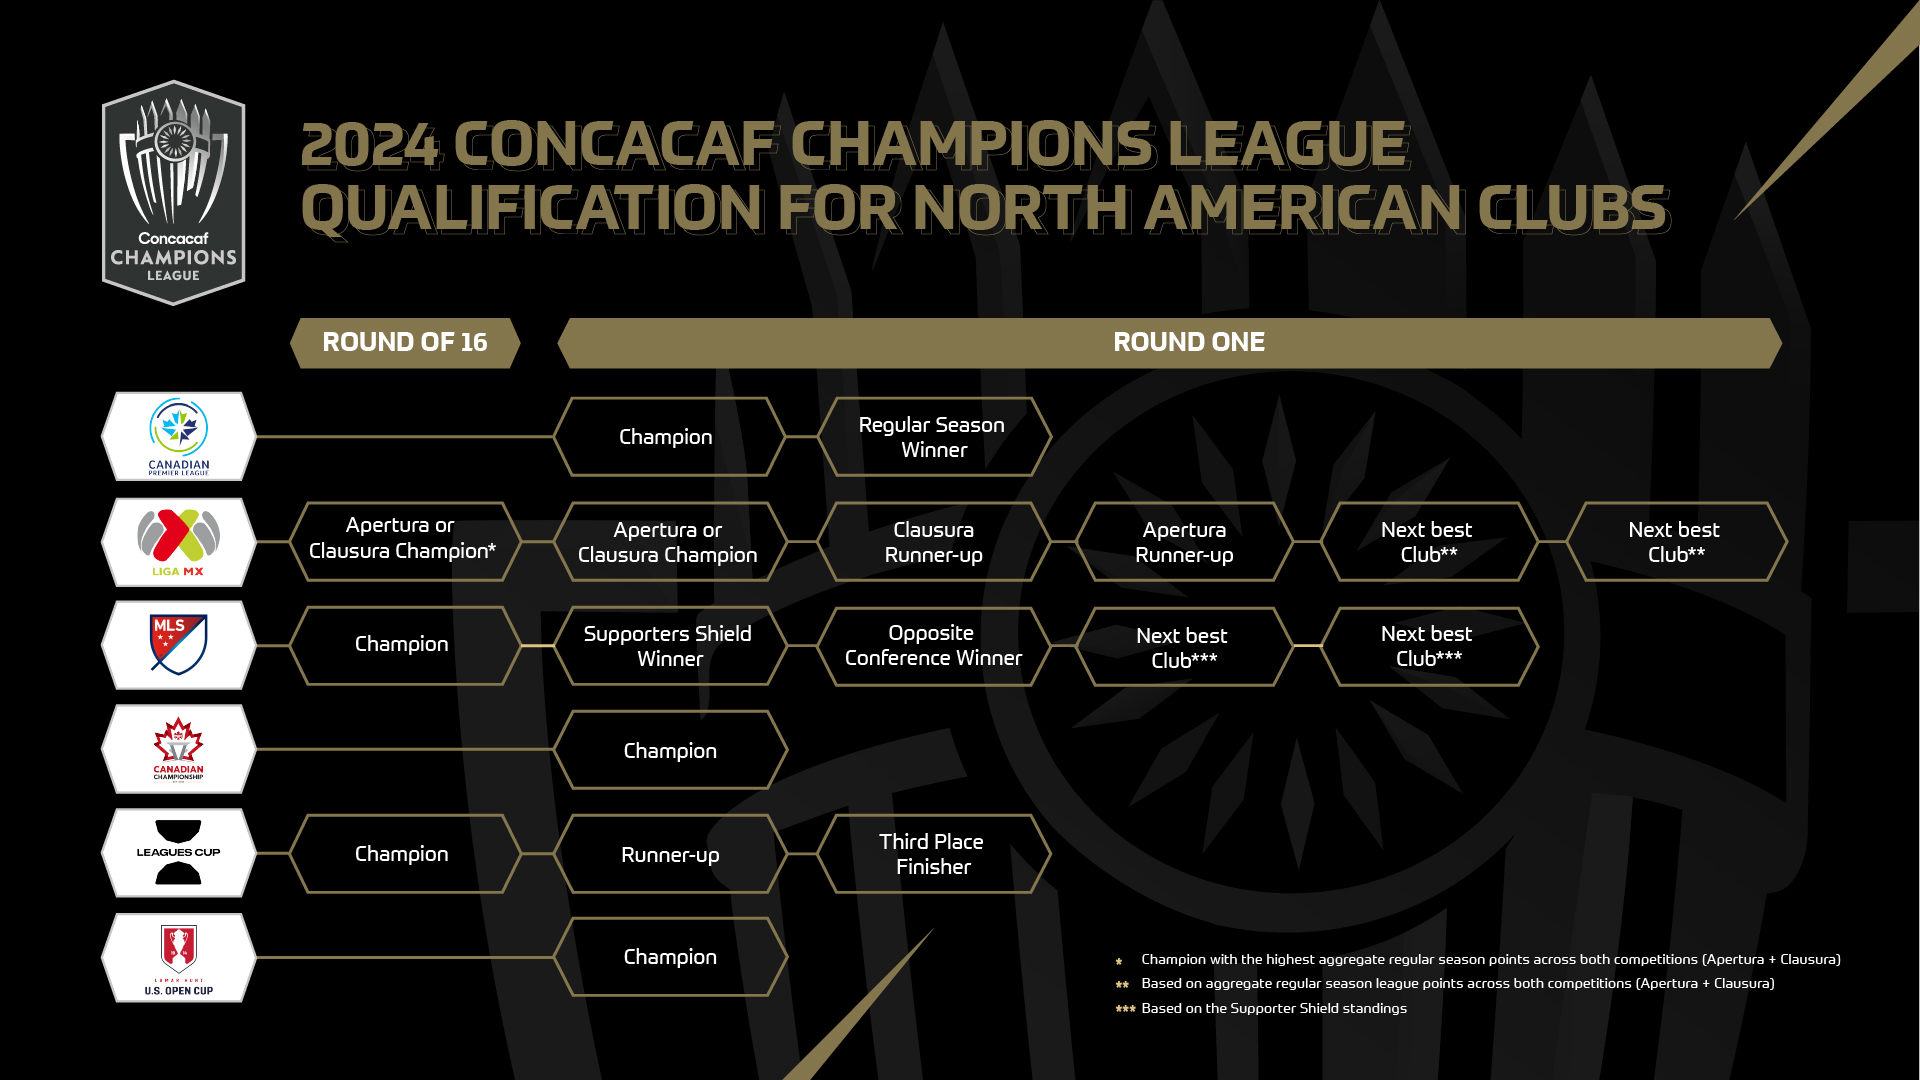 Concacaf announces qualification criteria for Confederation's expanded  Champions League starting in 2024